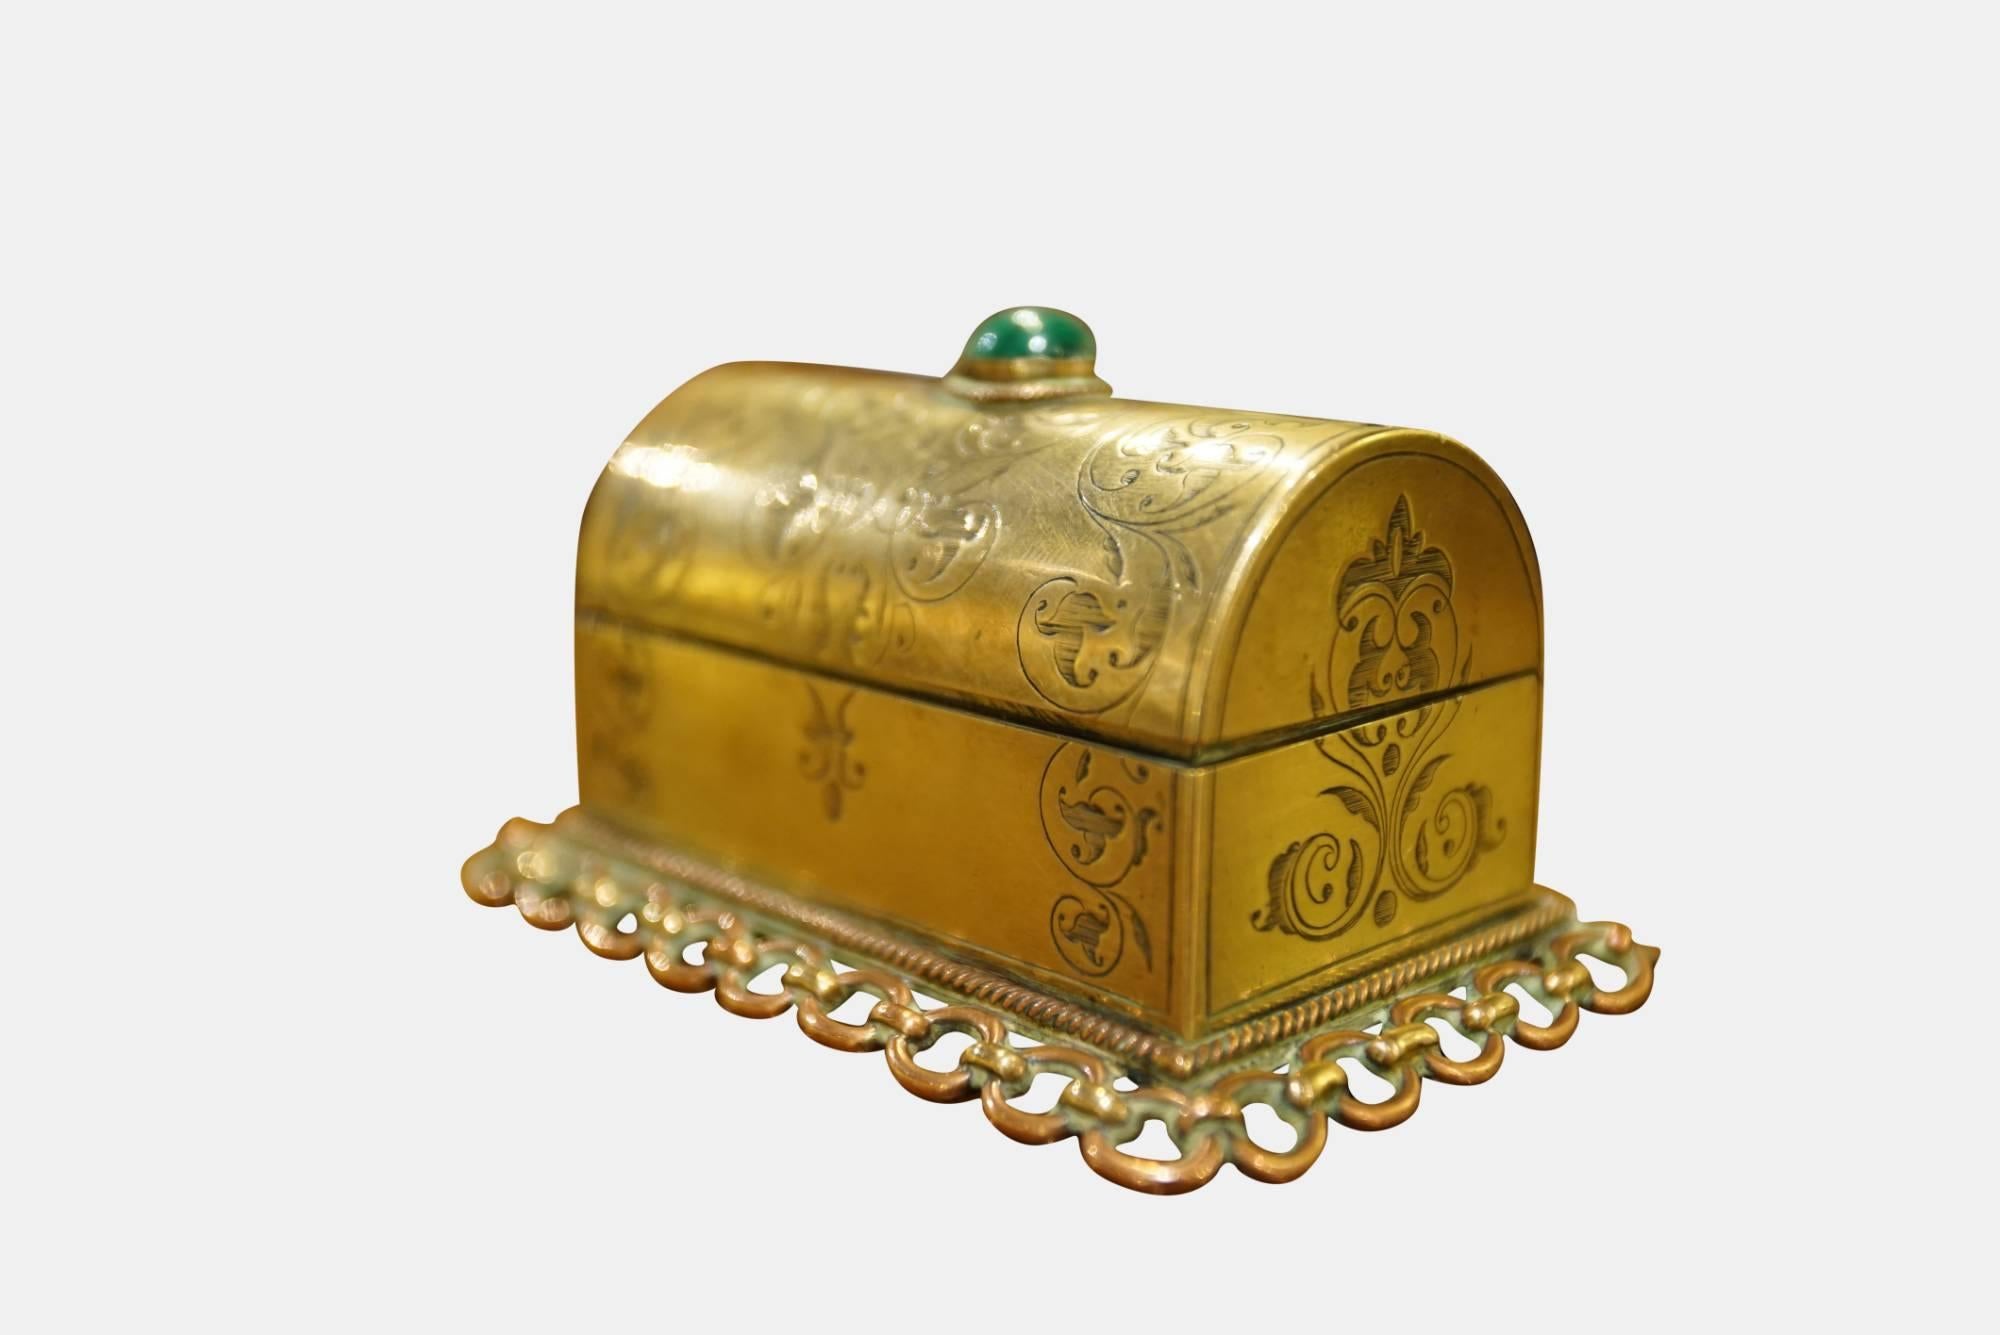 An unusual late 19th century dome lid engraved casket, the lid is set with a malachite cabochon.

Raised on chain link base

Likely a stamp or vesta box

Copperor brass alloys, circa 1880.